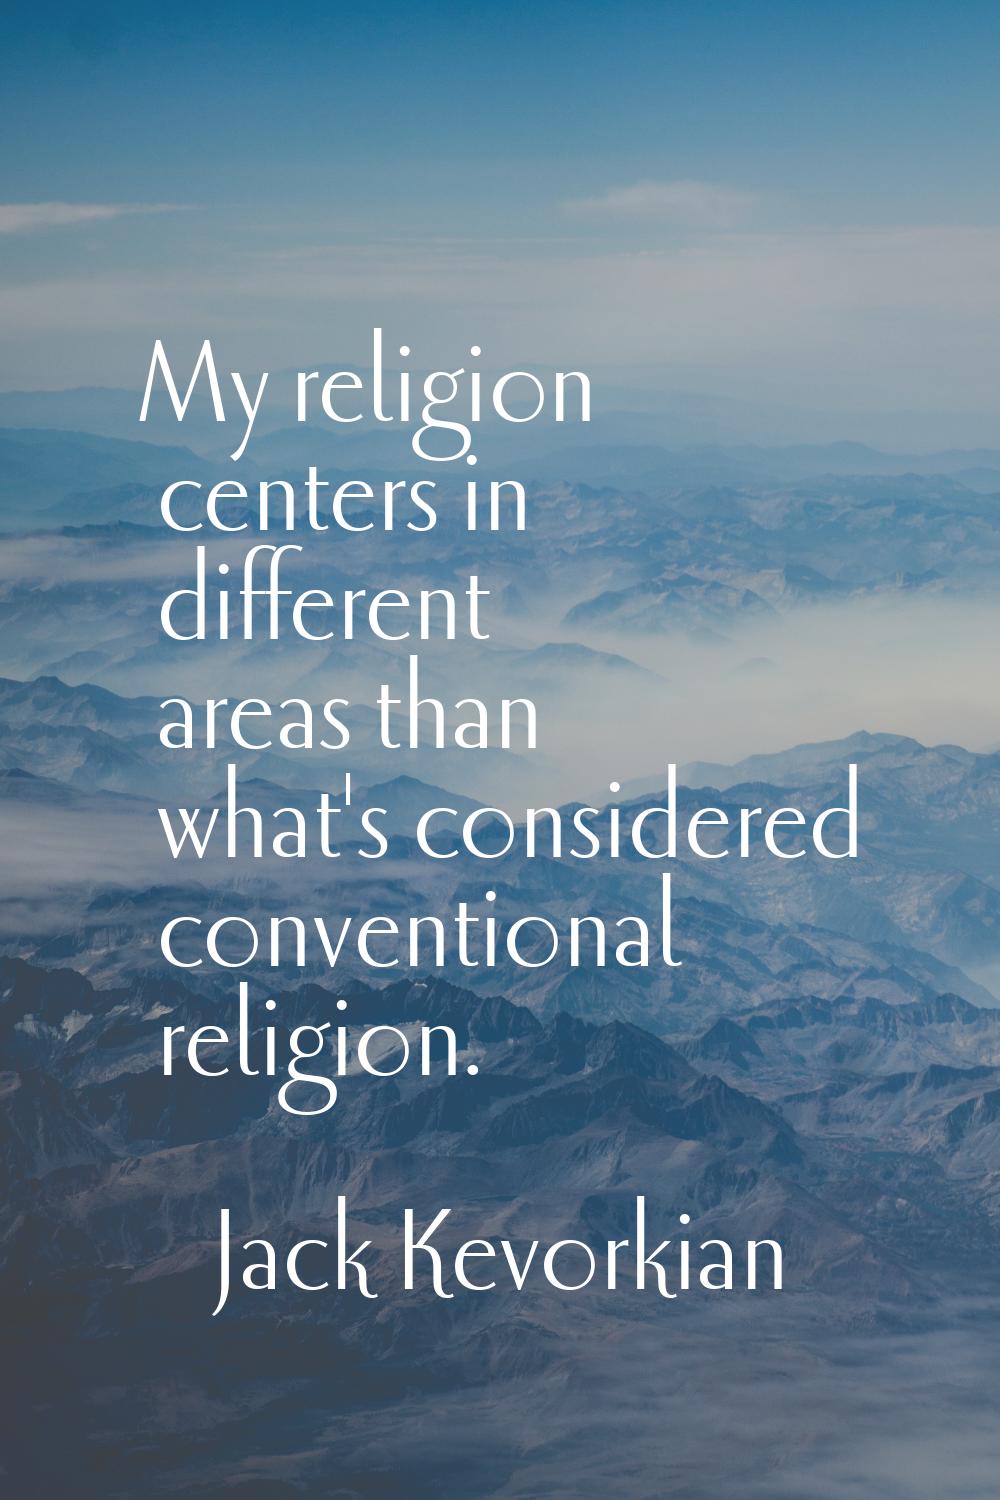 My religion centers in different areas than what's considered conventional religion.